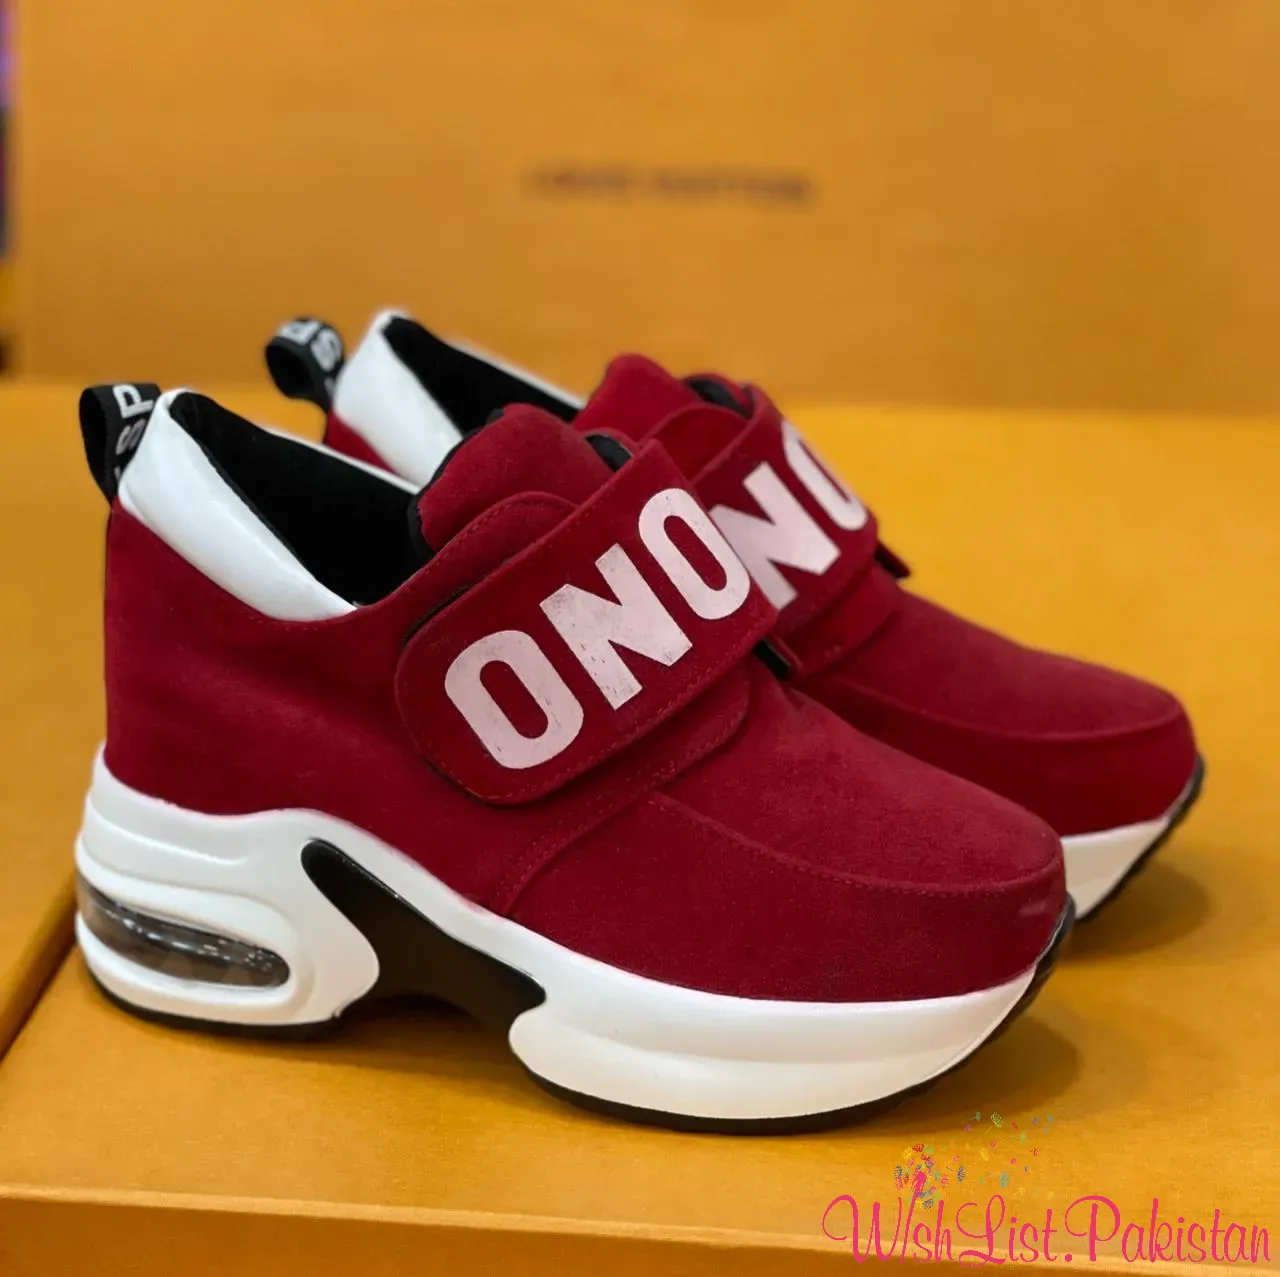 Best Price ONON Maroon Highshoes